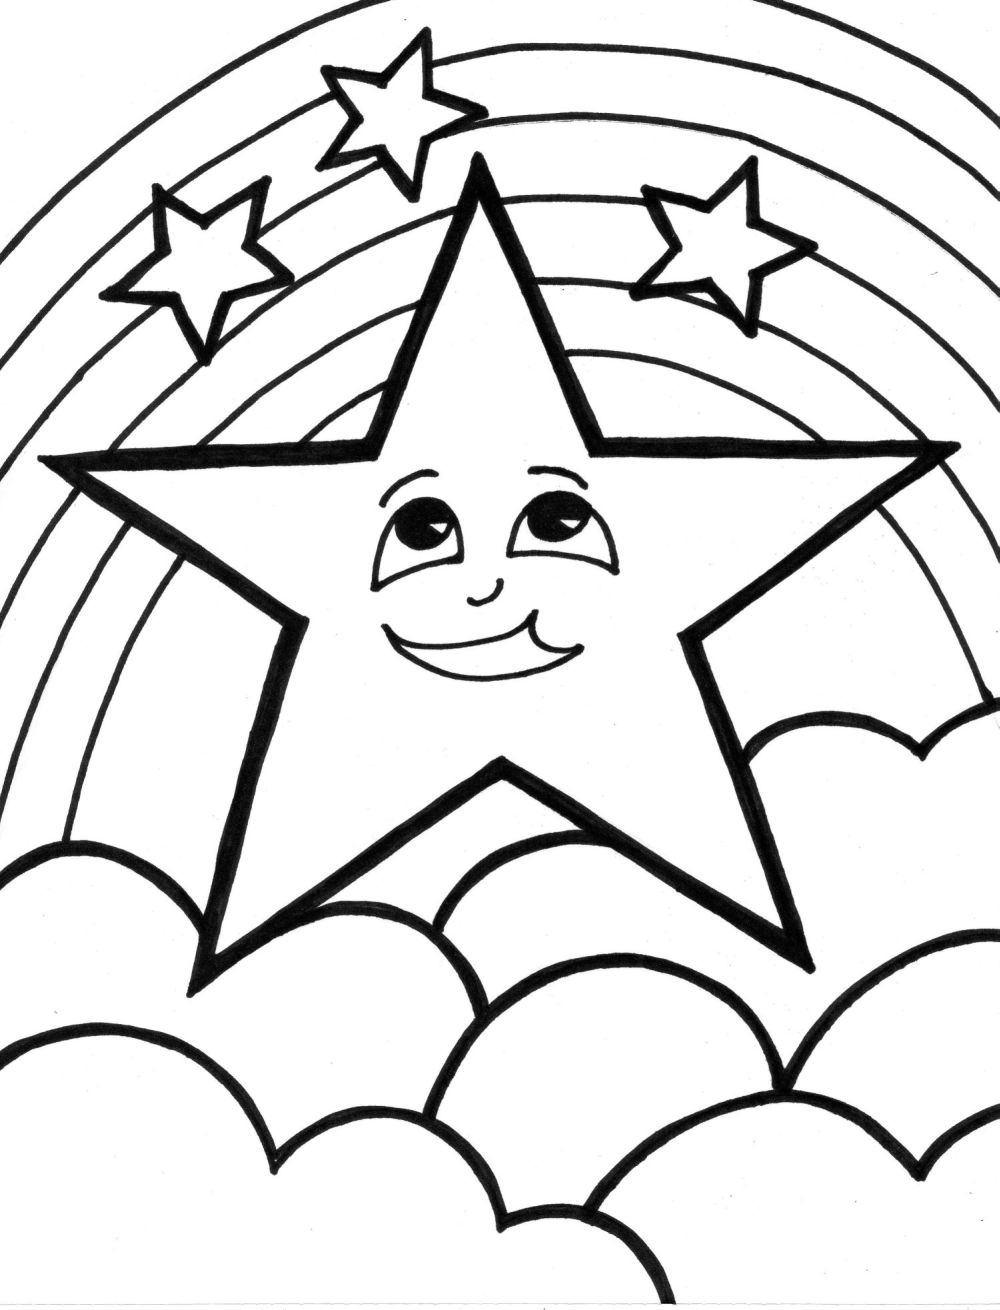 Shooting star coloring pages - Coloring Pages & Pictures - IMAGIXS